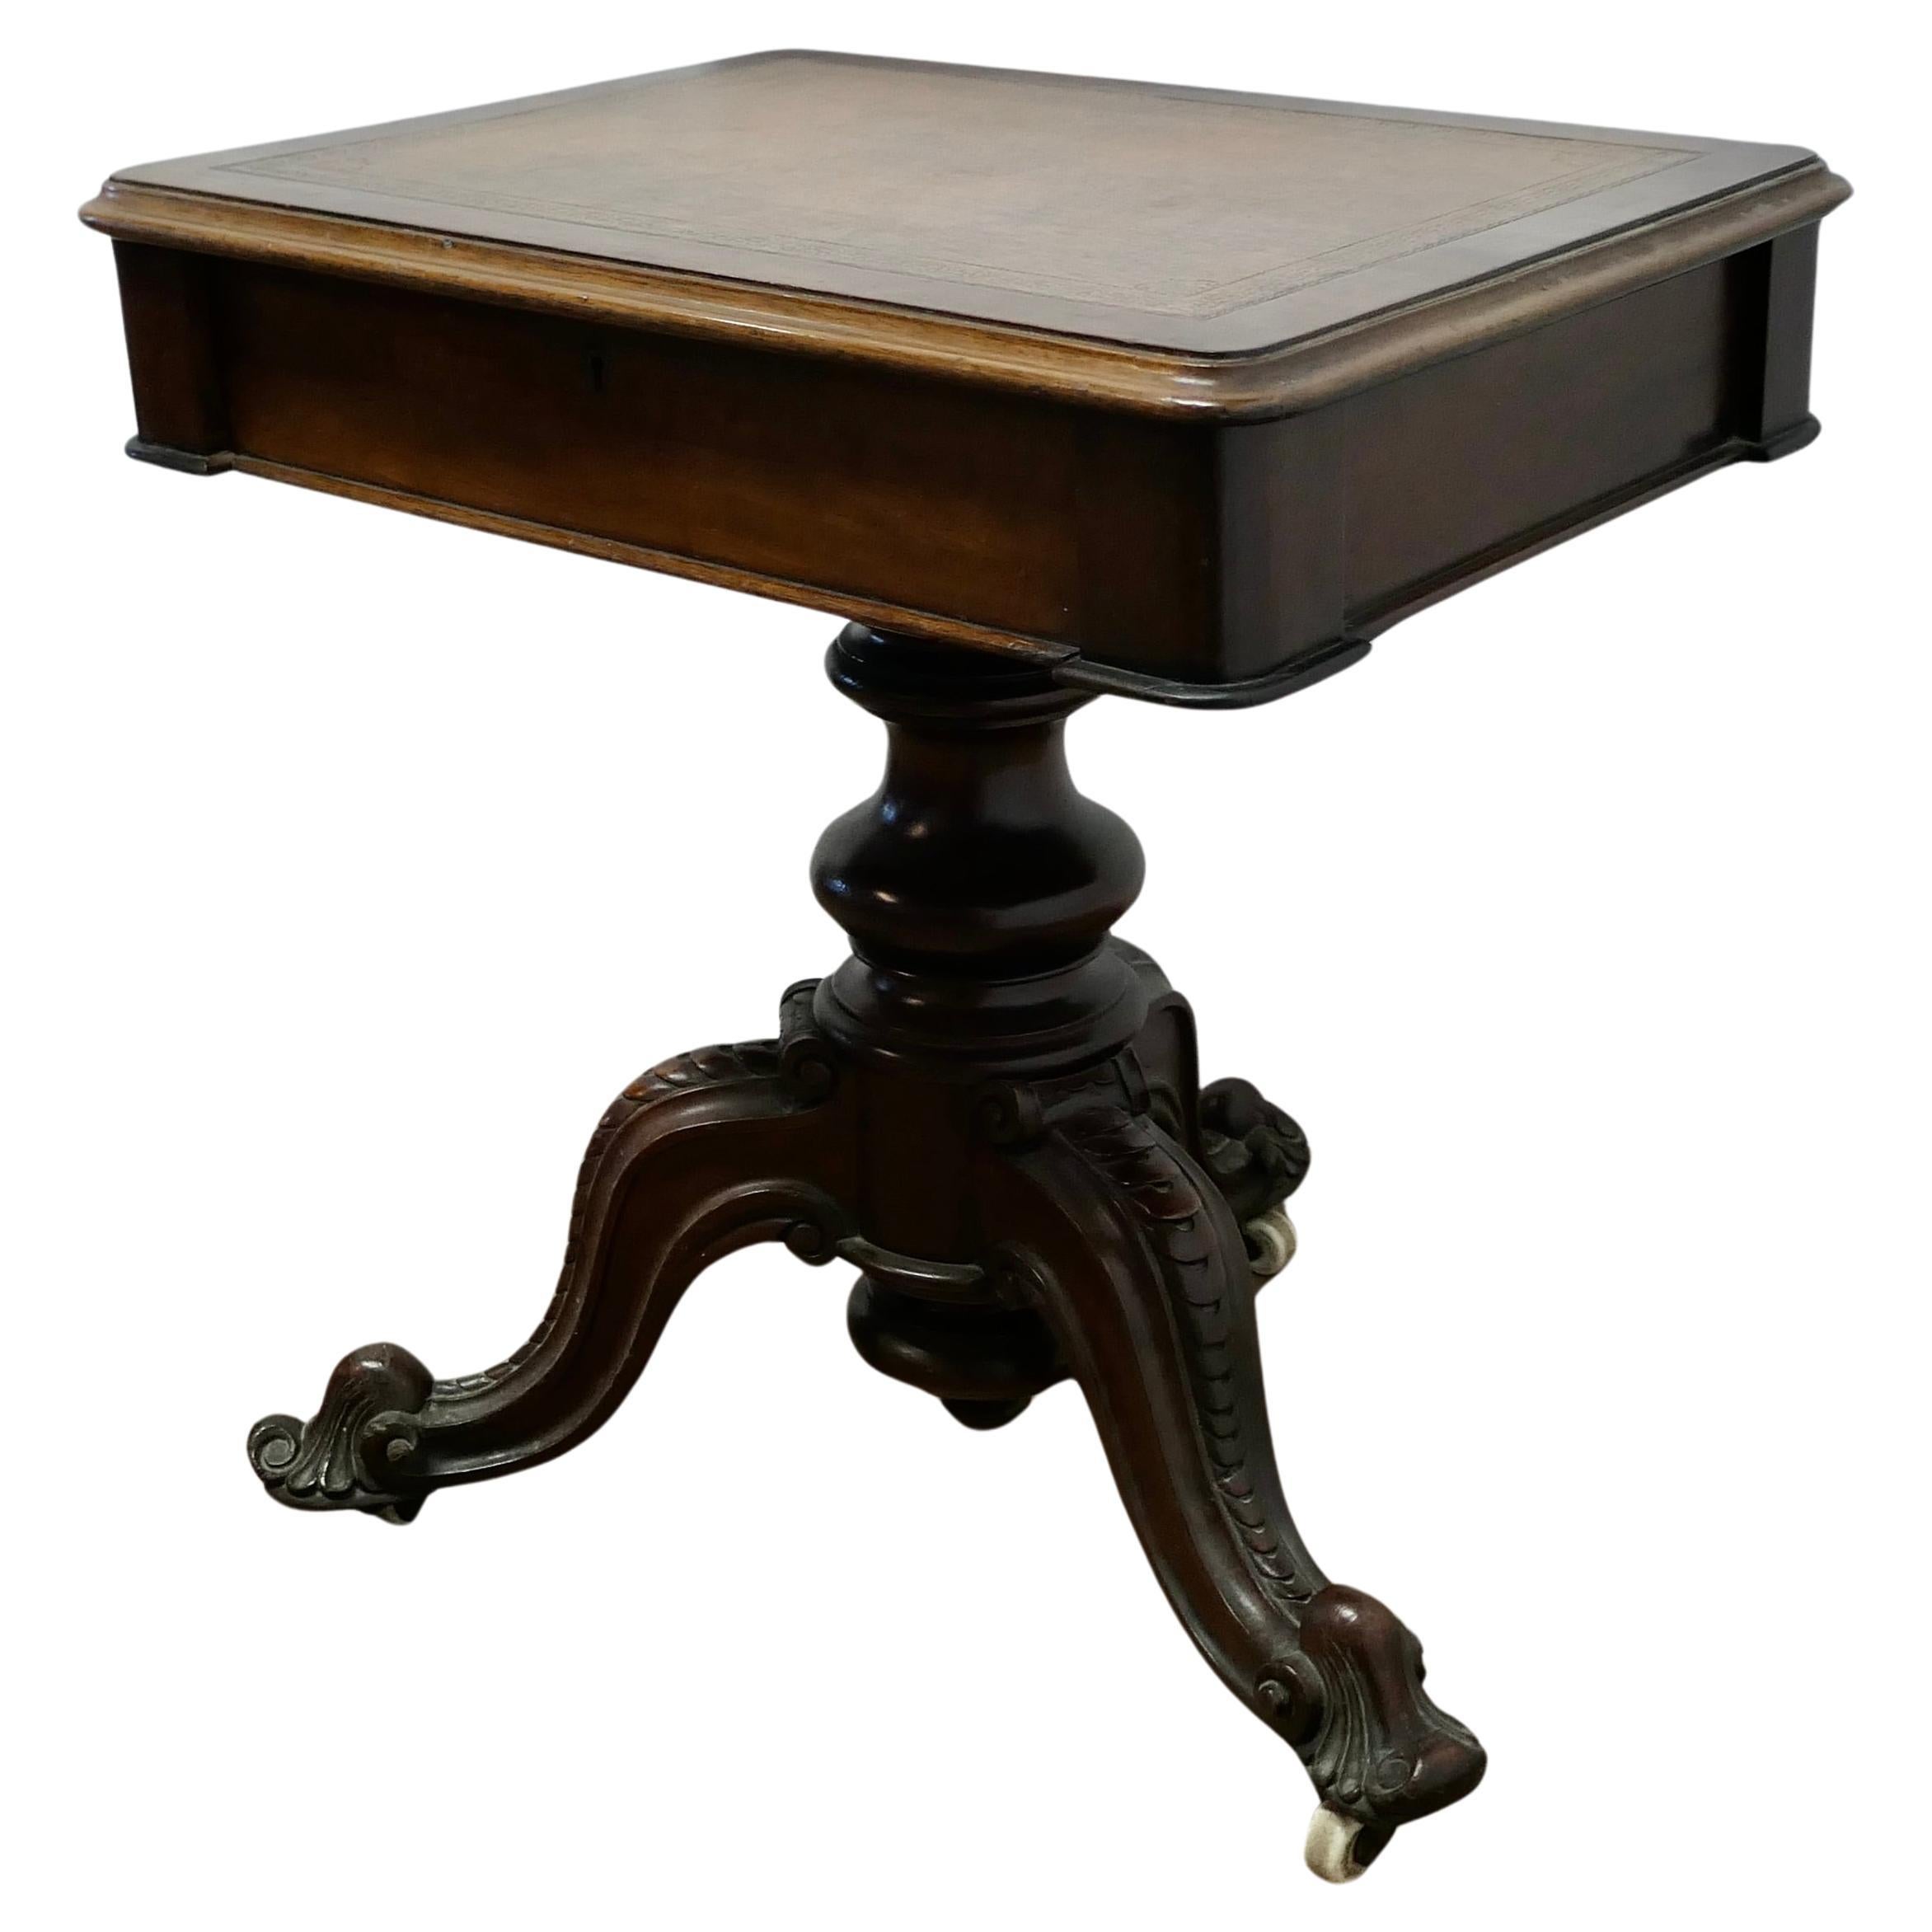 Victorian Adjustable Writing Table  This is a rare piece and a very useful desk